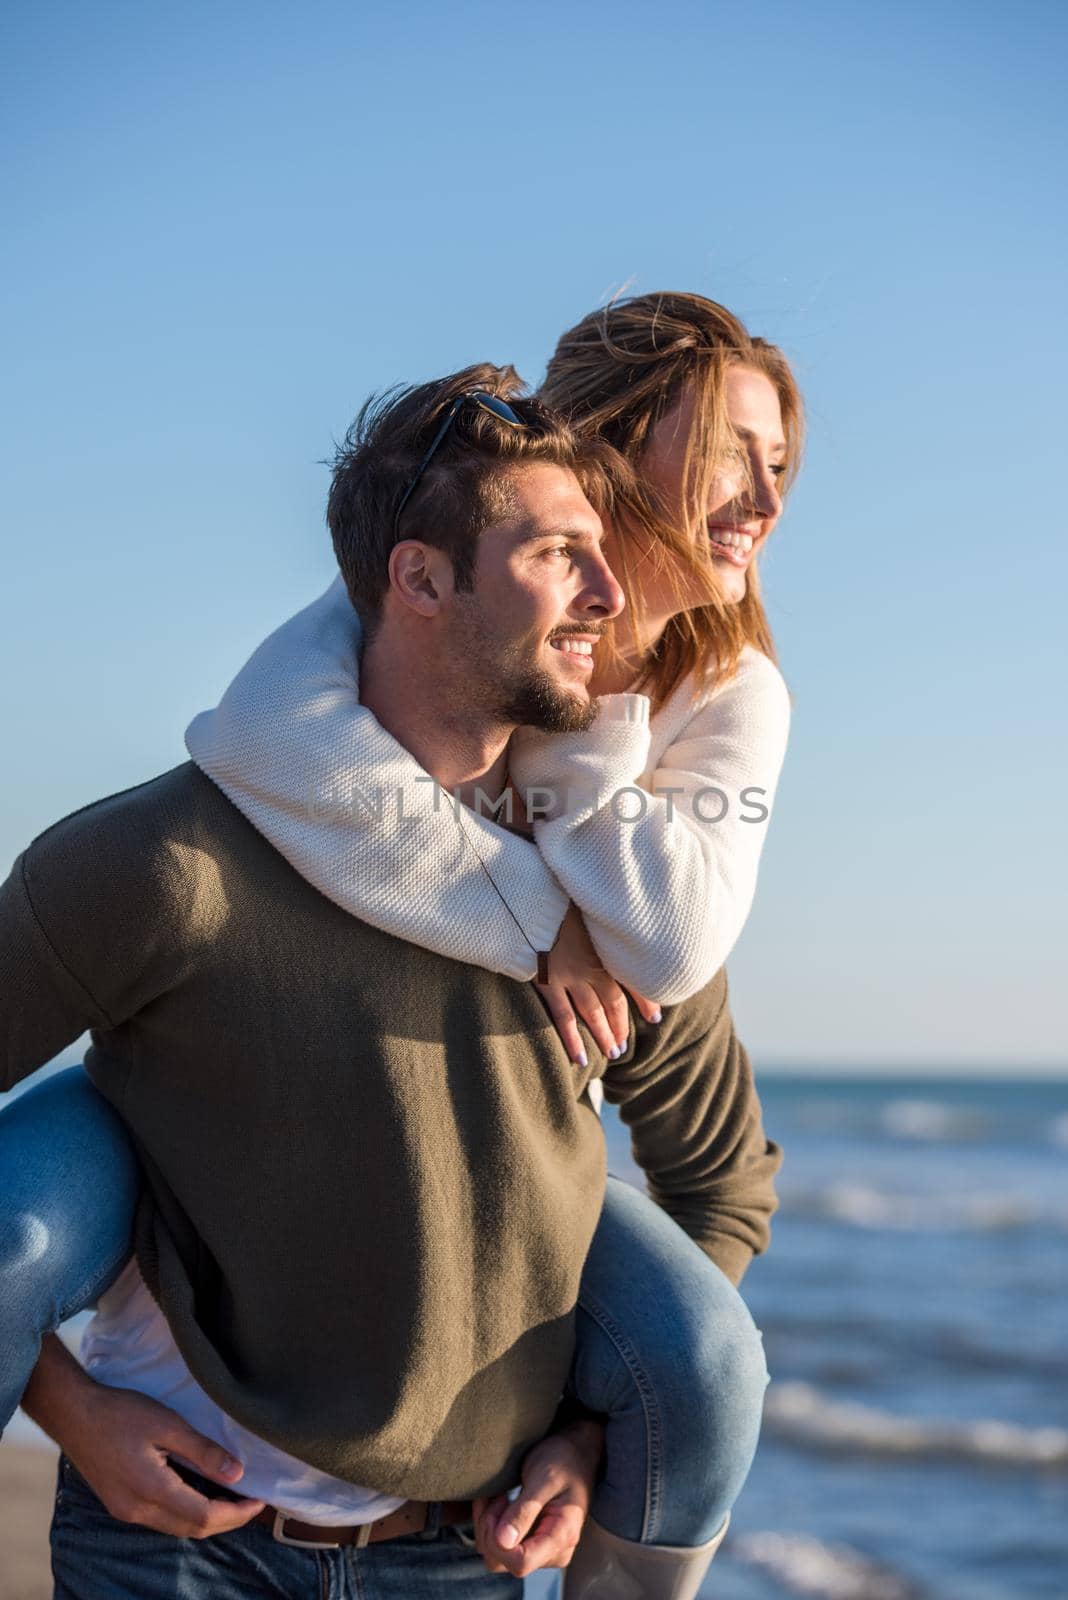 Men Giving Piggy Back Rides to his girlfriend At Sunset By The Sea, autumn time